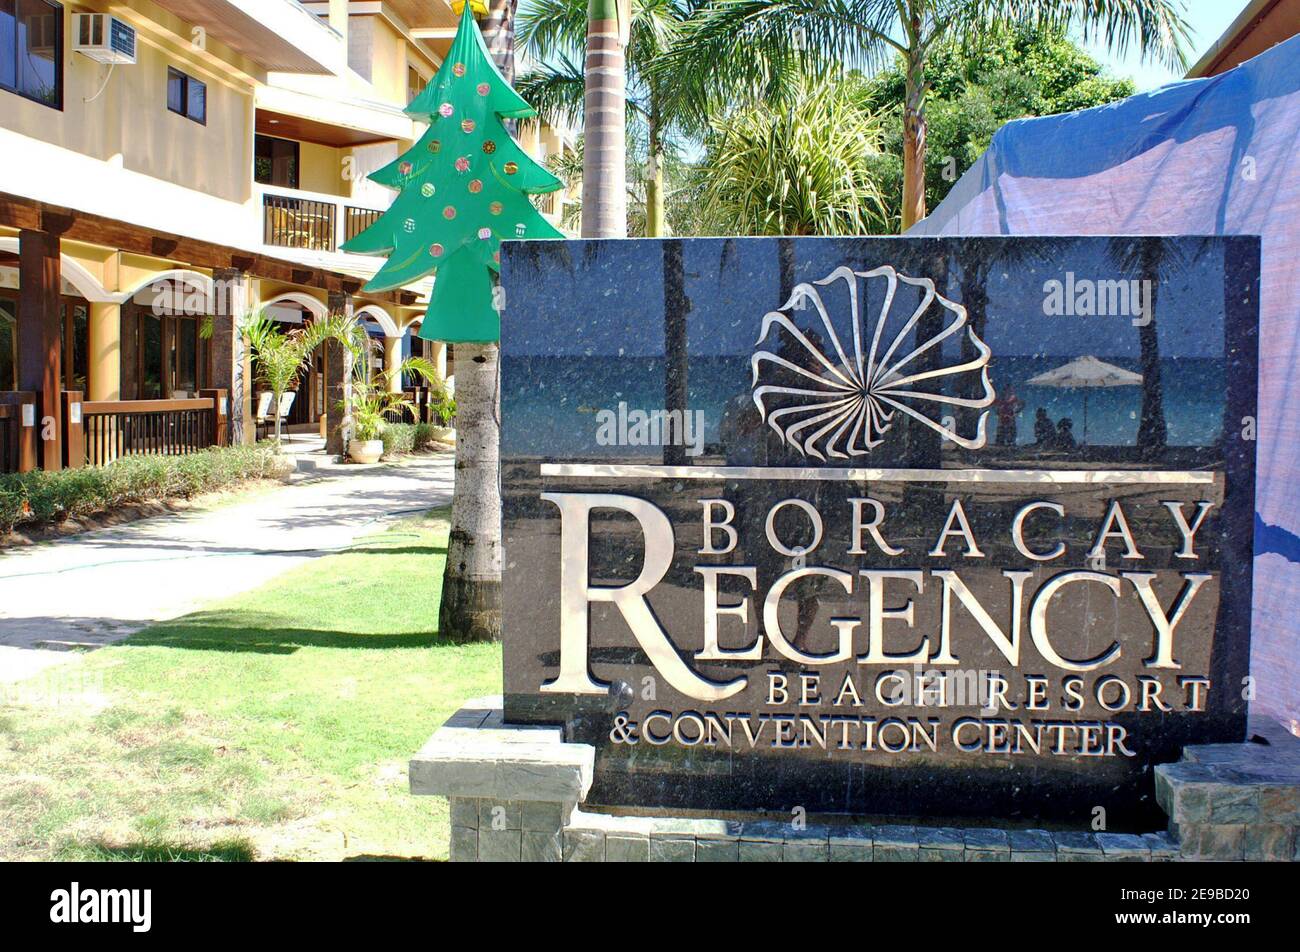 The Boracay Regency Beach Resort and Convention Center, locaed on White Beach in the Philippines, was the largest resort on the island in 2005.  Massive developments contributed to the need to more sustainably manage tourism on this resort island.  By 2017 the island attracted over 2 million annual visitors contributing to its closure in April 2018 by the government.  The entire island was closed for rehabilitation and redevelopment for six months and then followed a more sustainable phased opening over the following years. Stock Photo